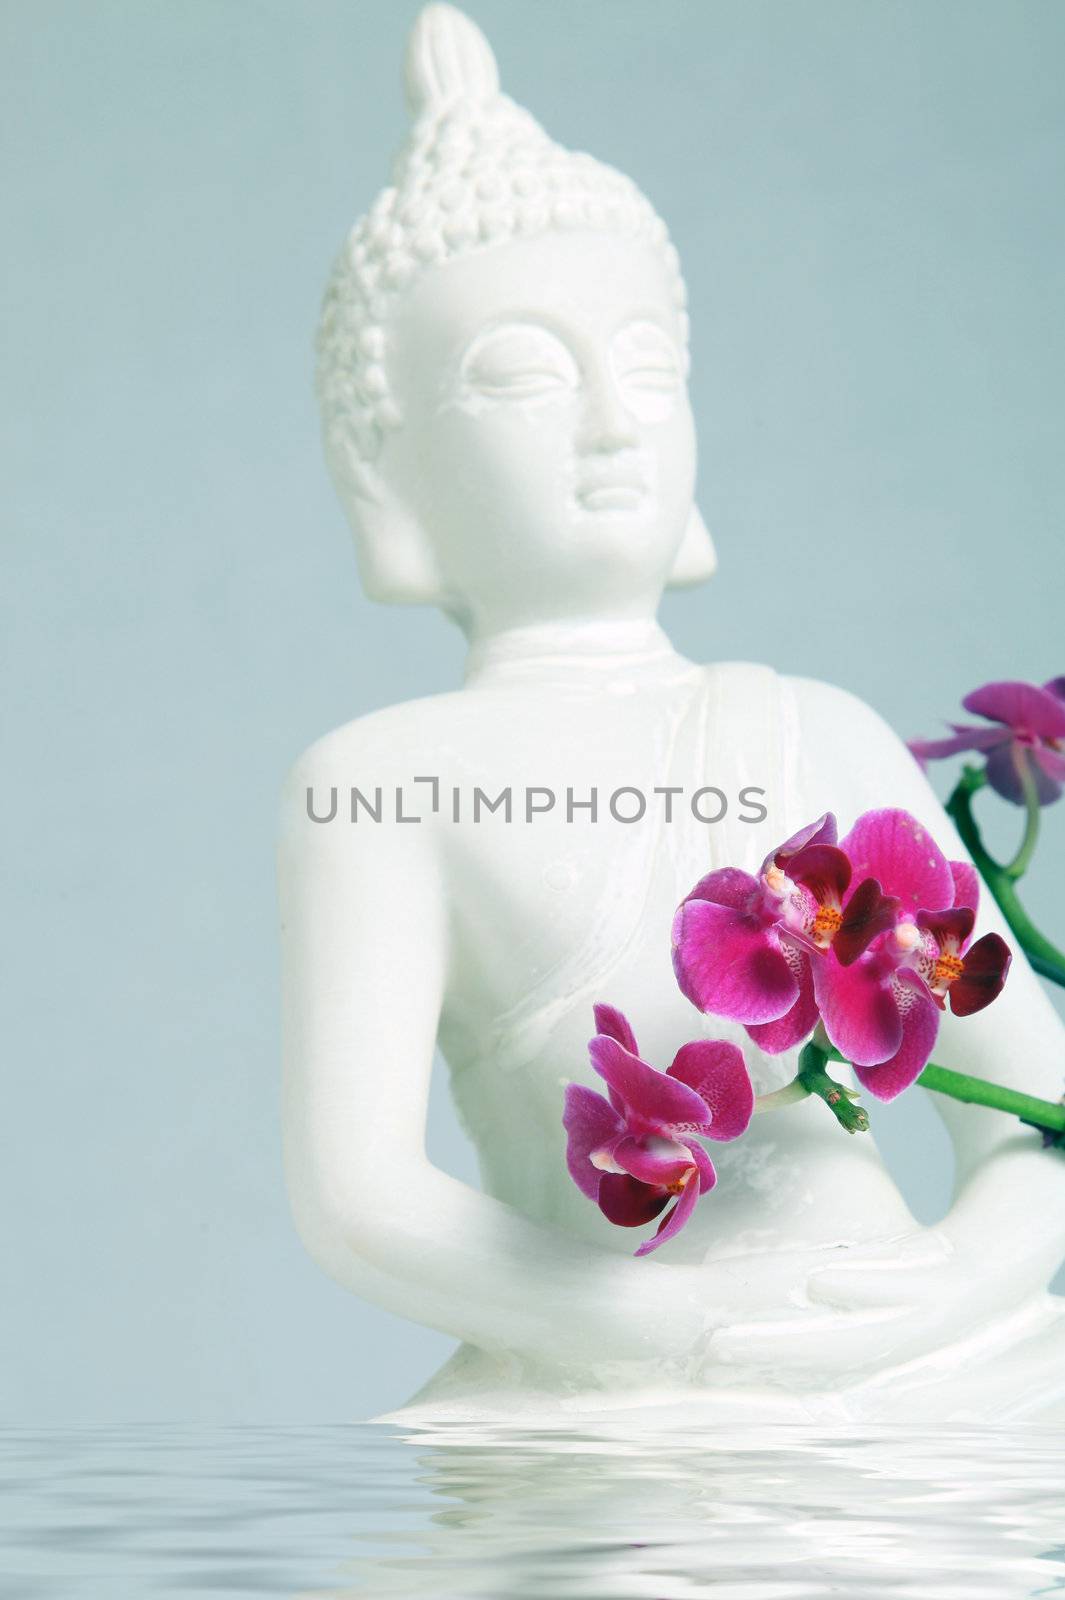 Buddha in the water with a white orchid by Farina6000